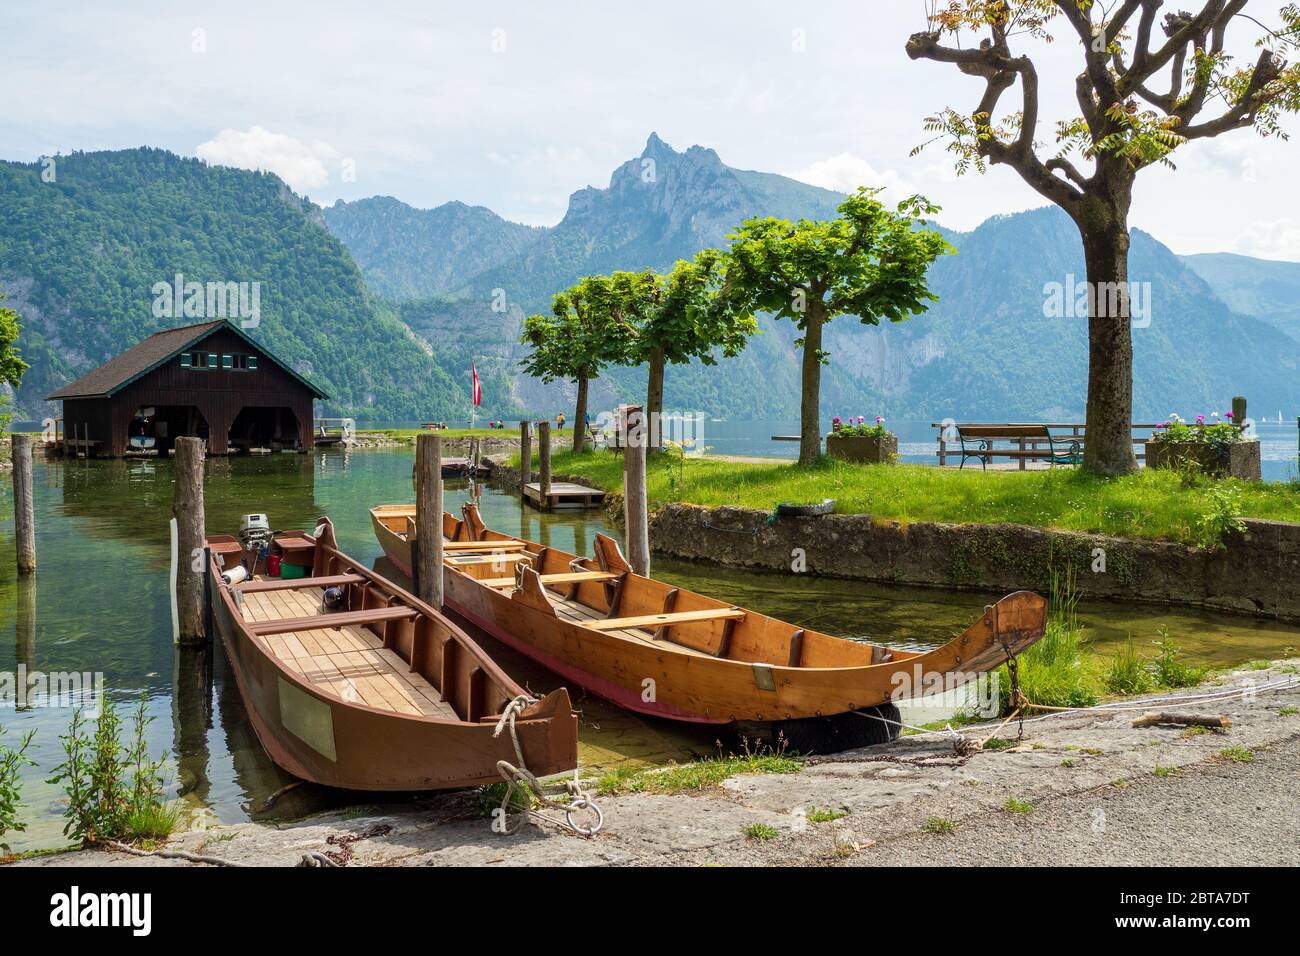 View of two "Plätten", traditional wooden flat-bottomed boats, sitting on the lakeshore of the Traunsee at Traunkirchen, Salzkammergut region, Austria Stock Photo